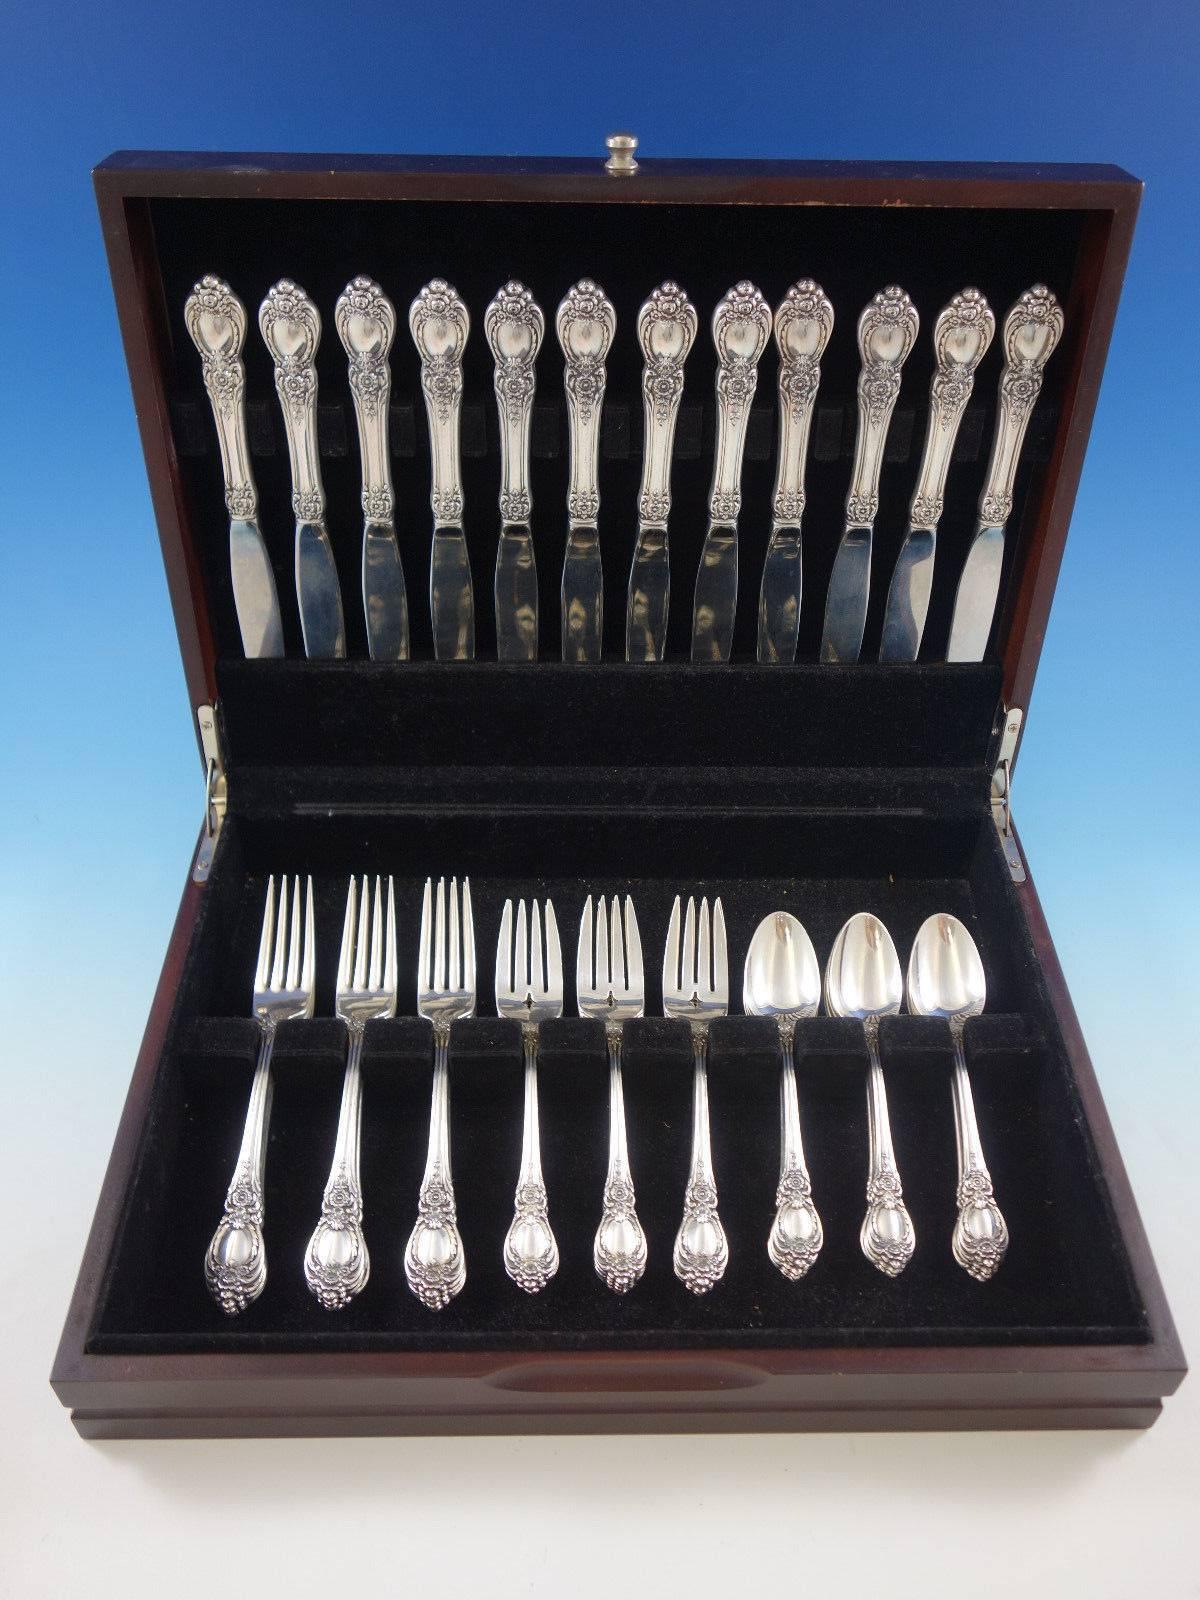 Stanton Hall by Oneida sterling silver flatware set, 48 pieces. This set includes: 

12 knives, 8 7/8